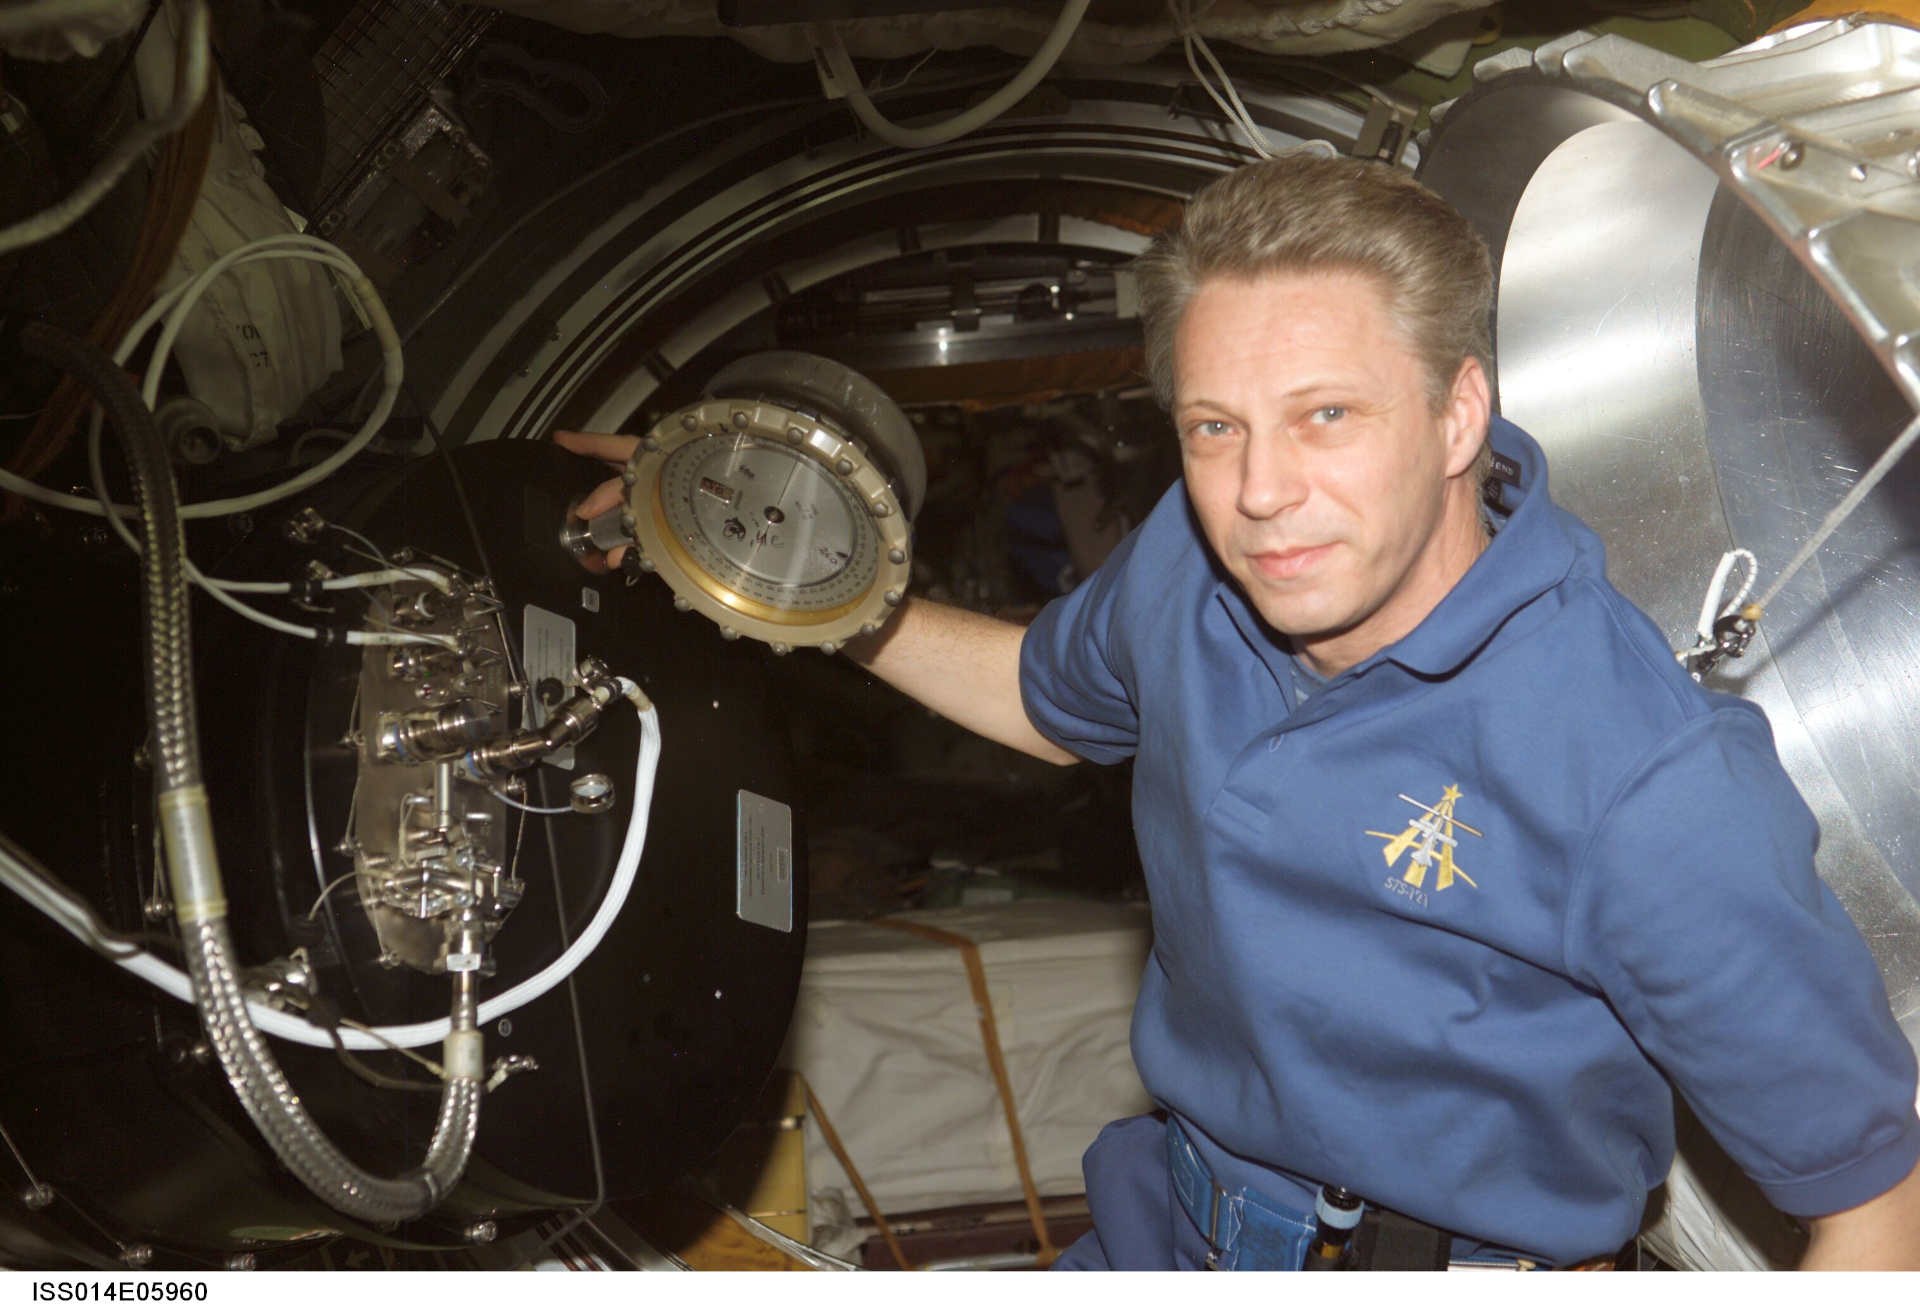 Astronaut Thomas Reiter with the 'PK-3 Plus' apparatus in October 2006, during his Astrolab mission on the ISS